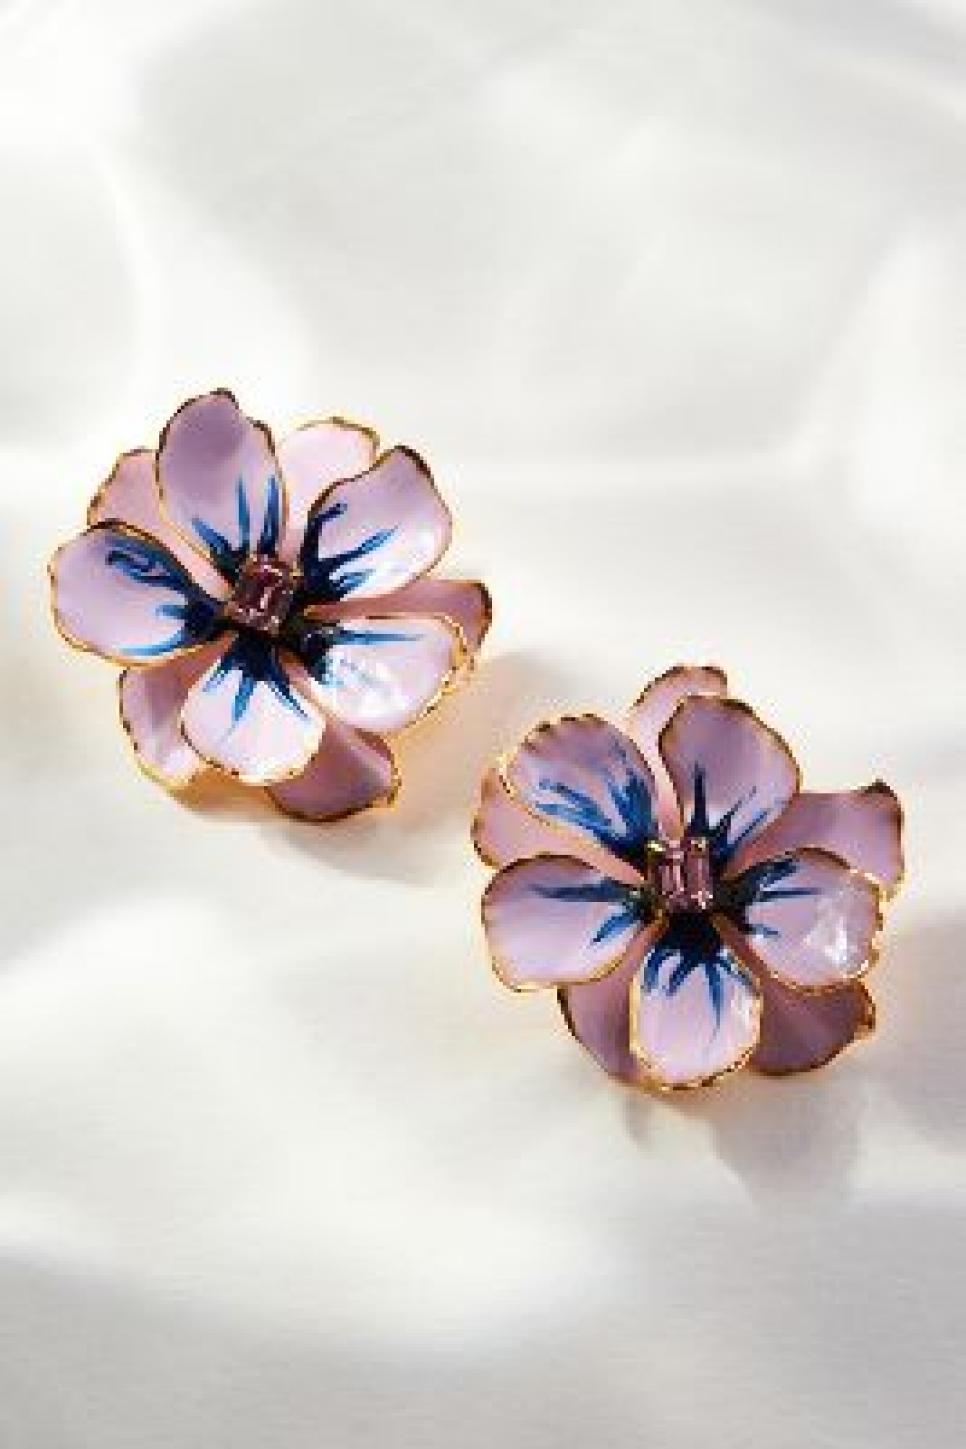 rx-anthropologieanthropologie-womens-the-pink-reef-hand-painted-earrings.jpeg